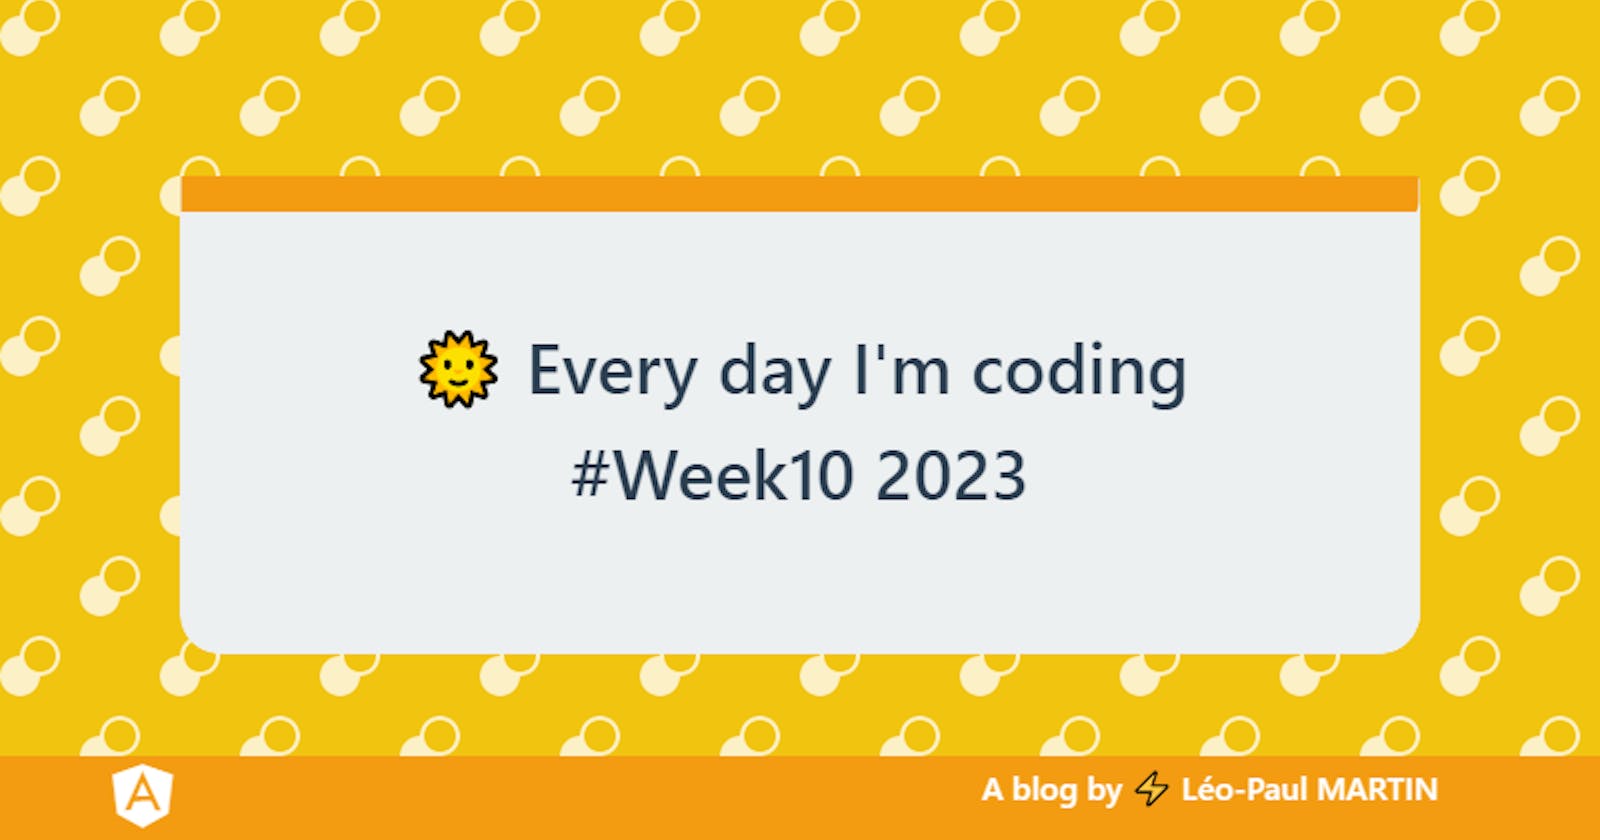 🌞 Every day I'm coding #Week10 2023